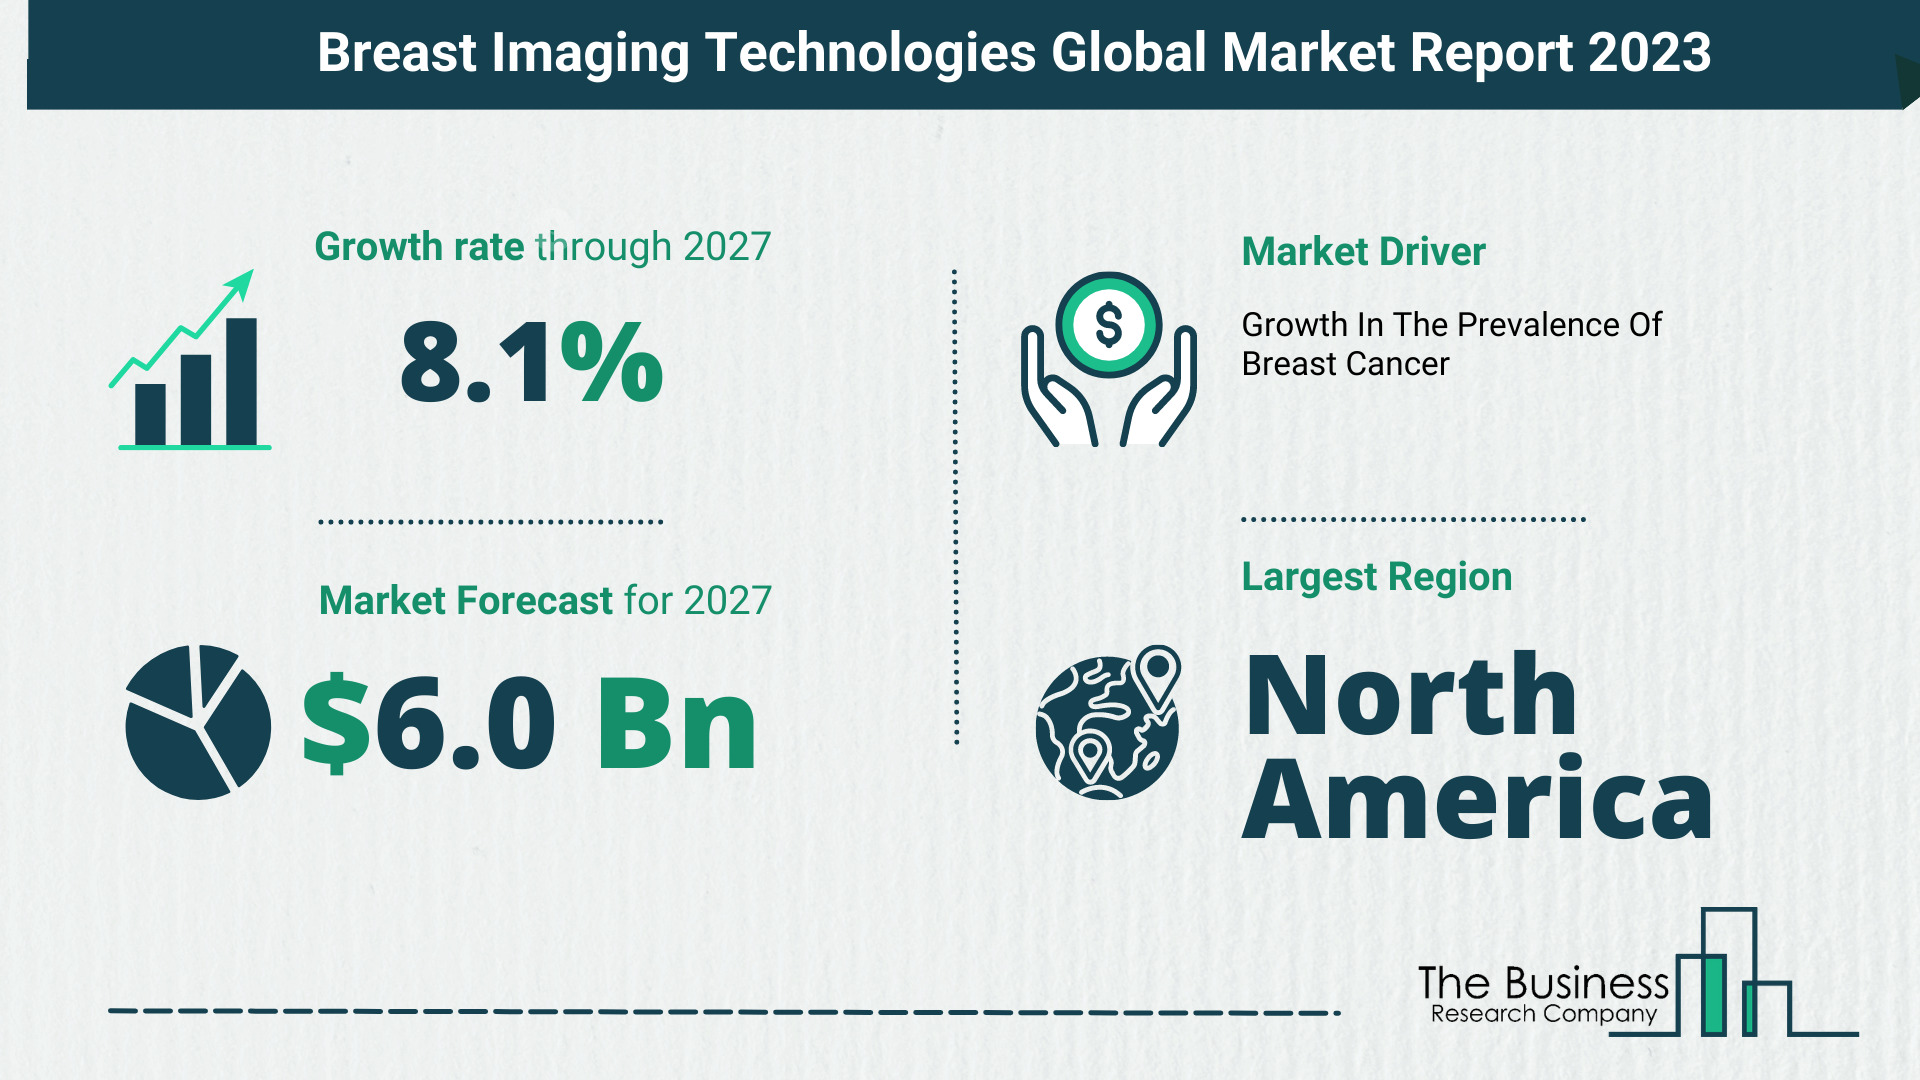 What Will The Breast Imaging Technologies Market Look Like In 2023?